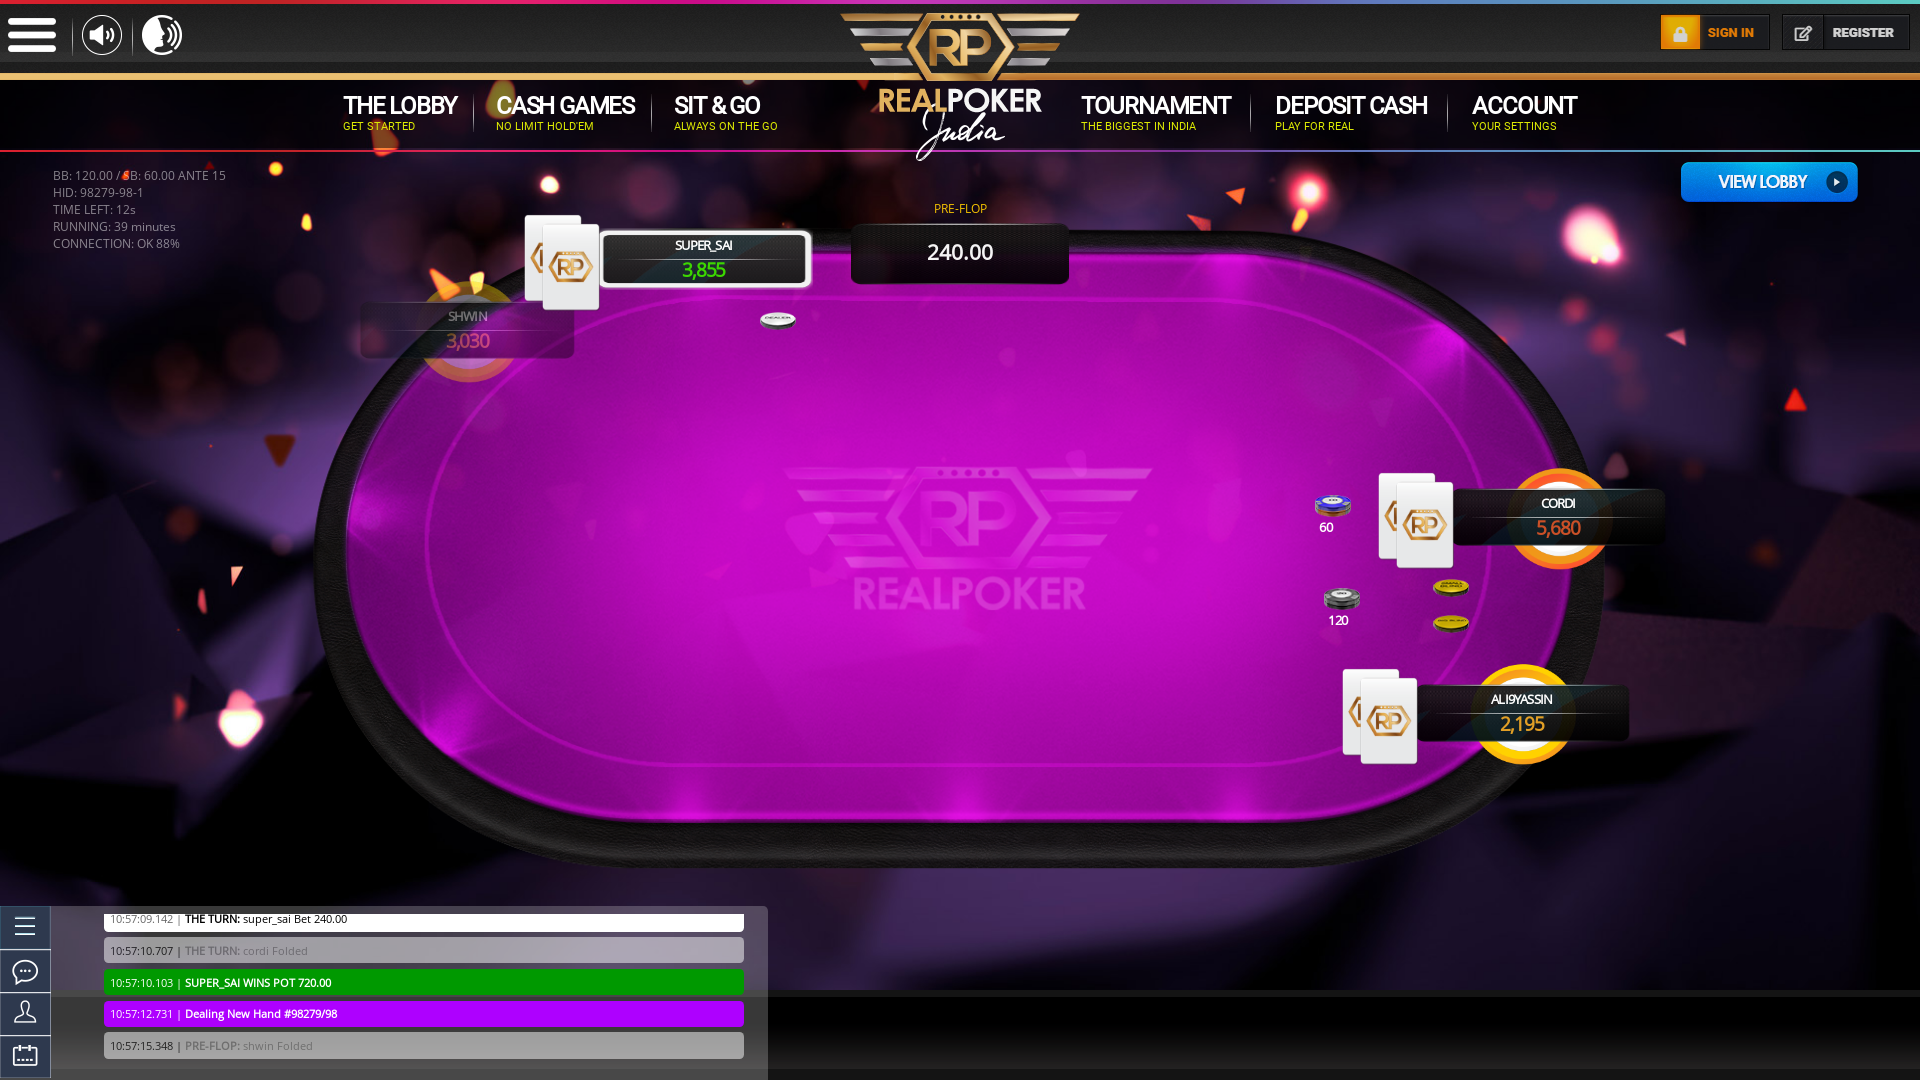 Online poker on a 10 player table in the 39th minute match up